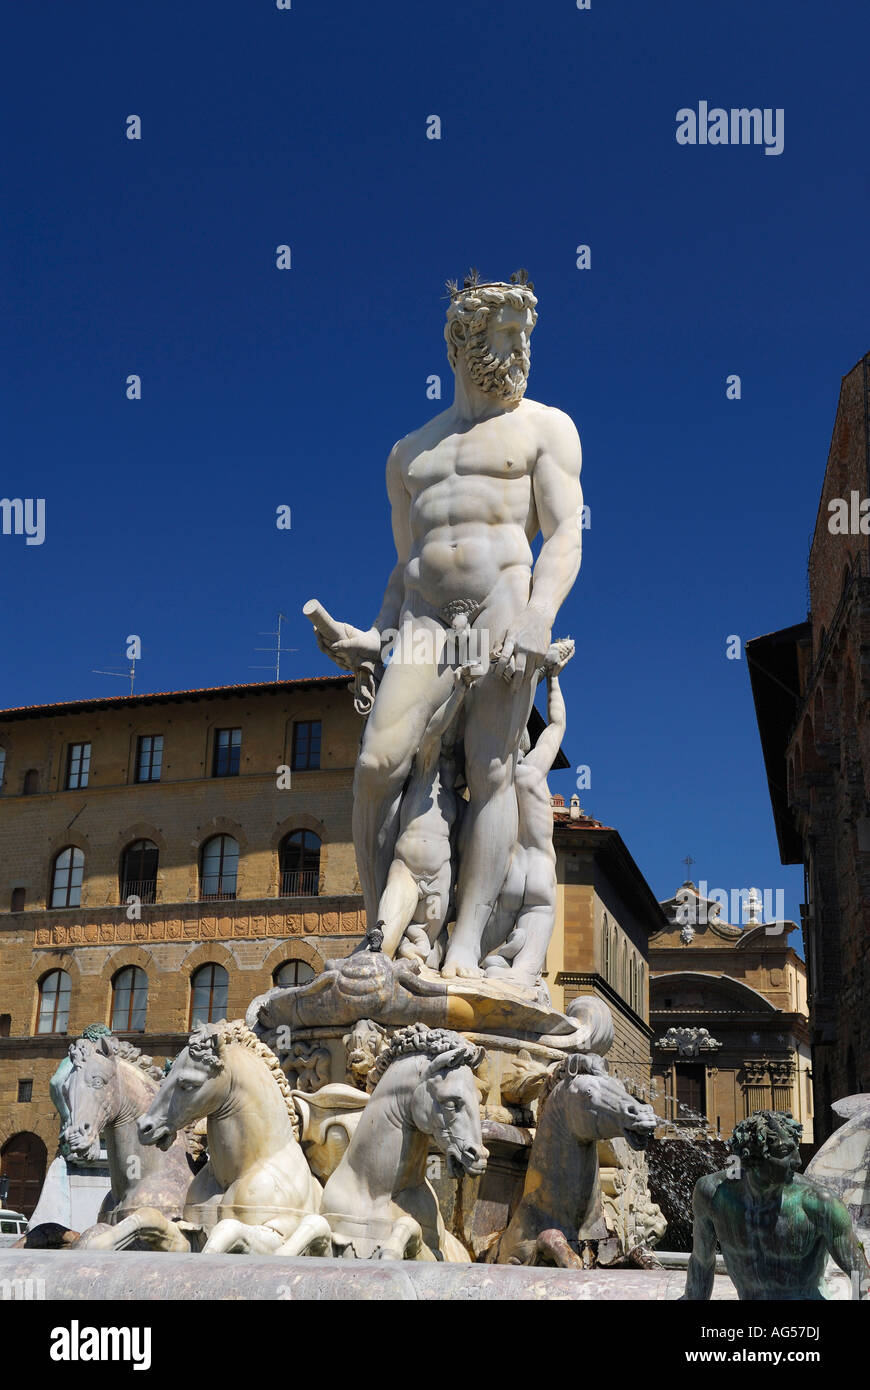 Sculpture of Biancone Neptune fountain by Ammannati in Piazza della Signoria Florence Tuscany Italy with blue sky Stock Photo